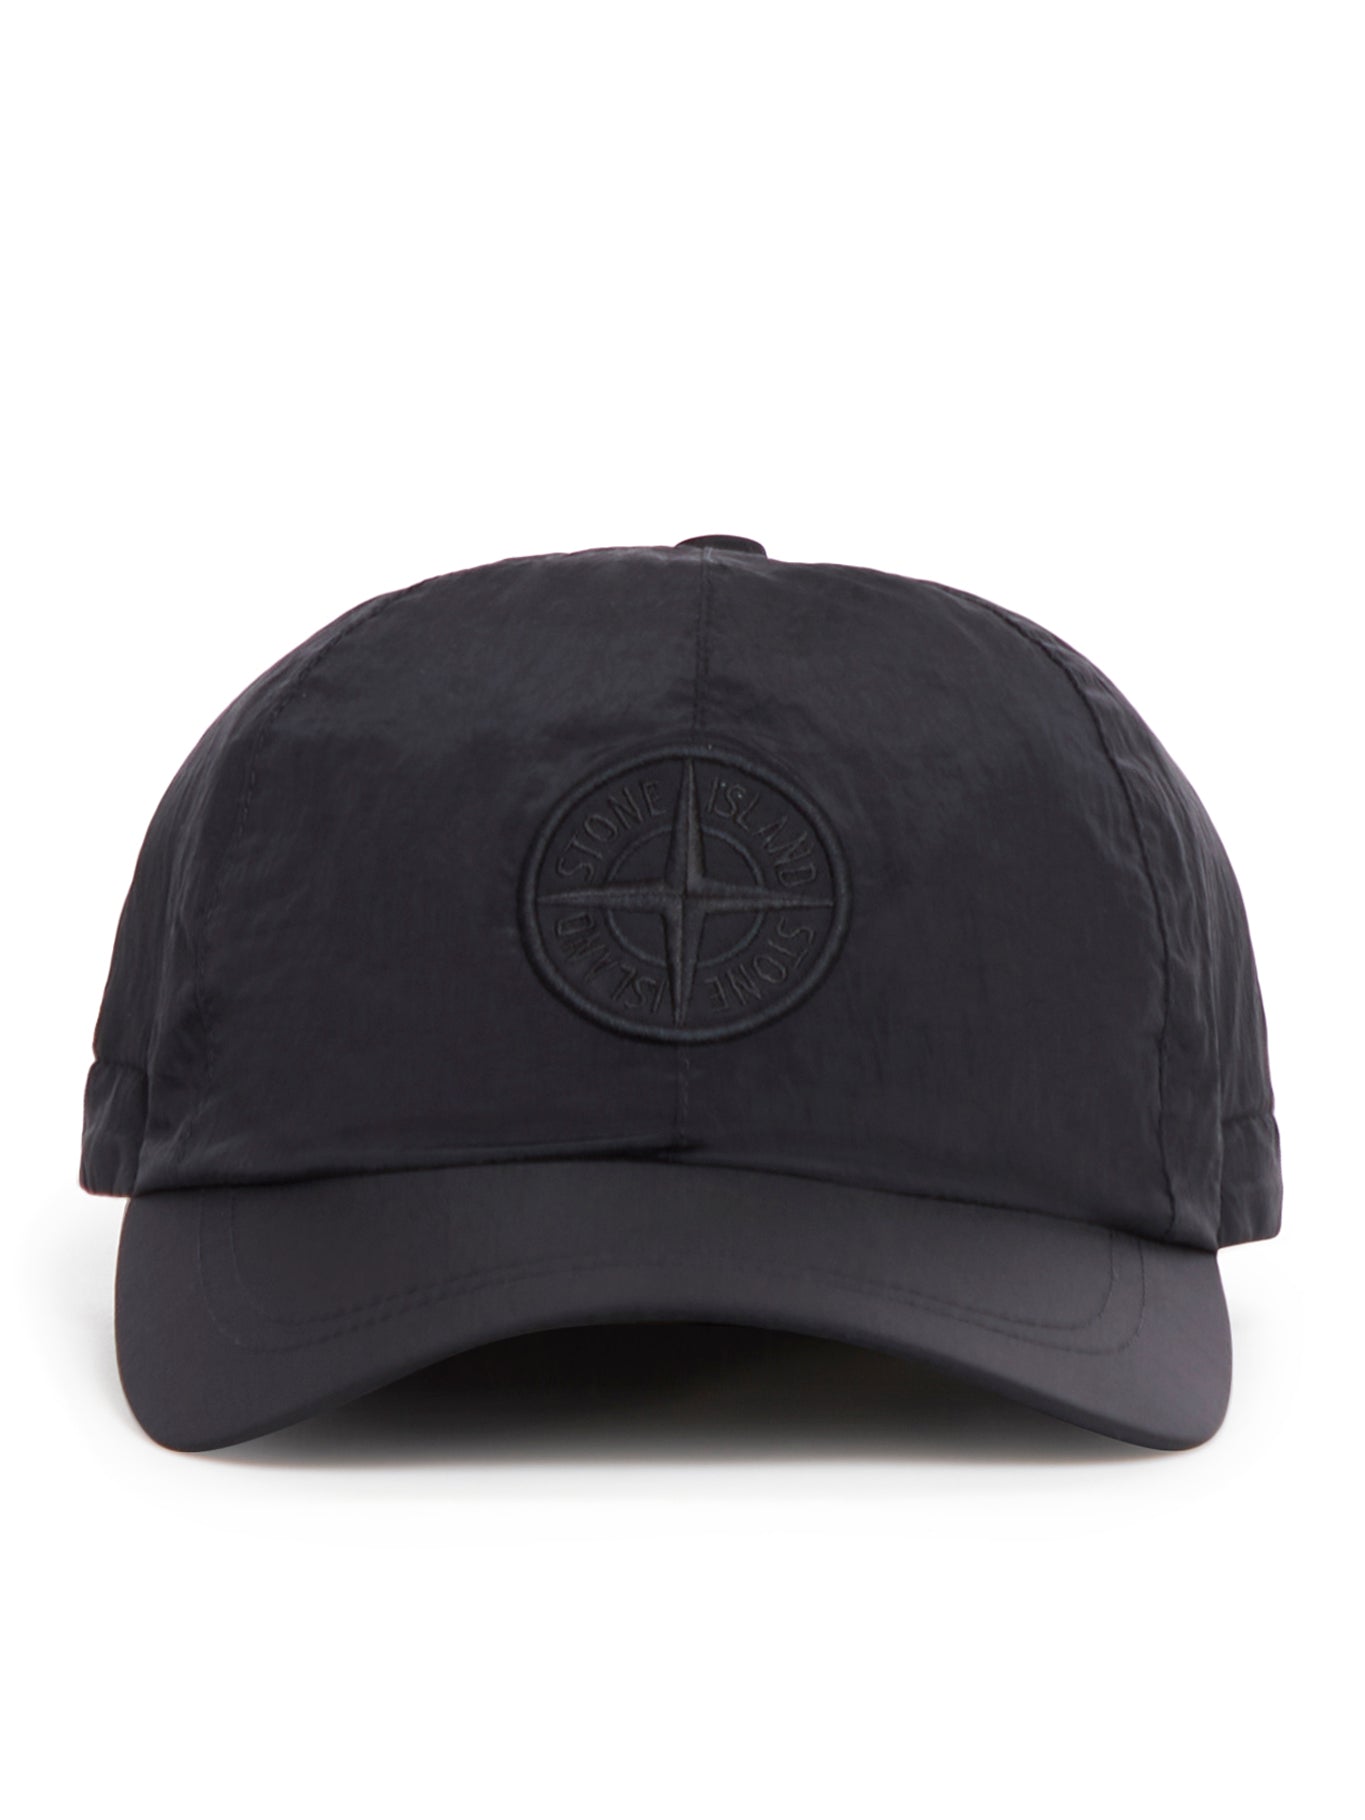 hat with embroidered logo